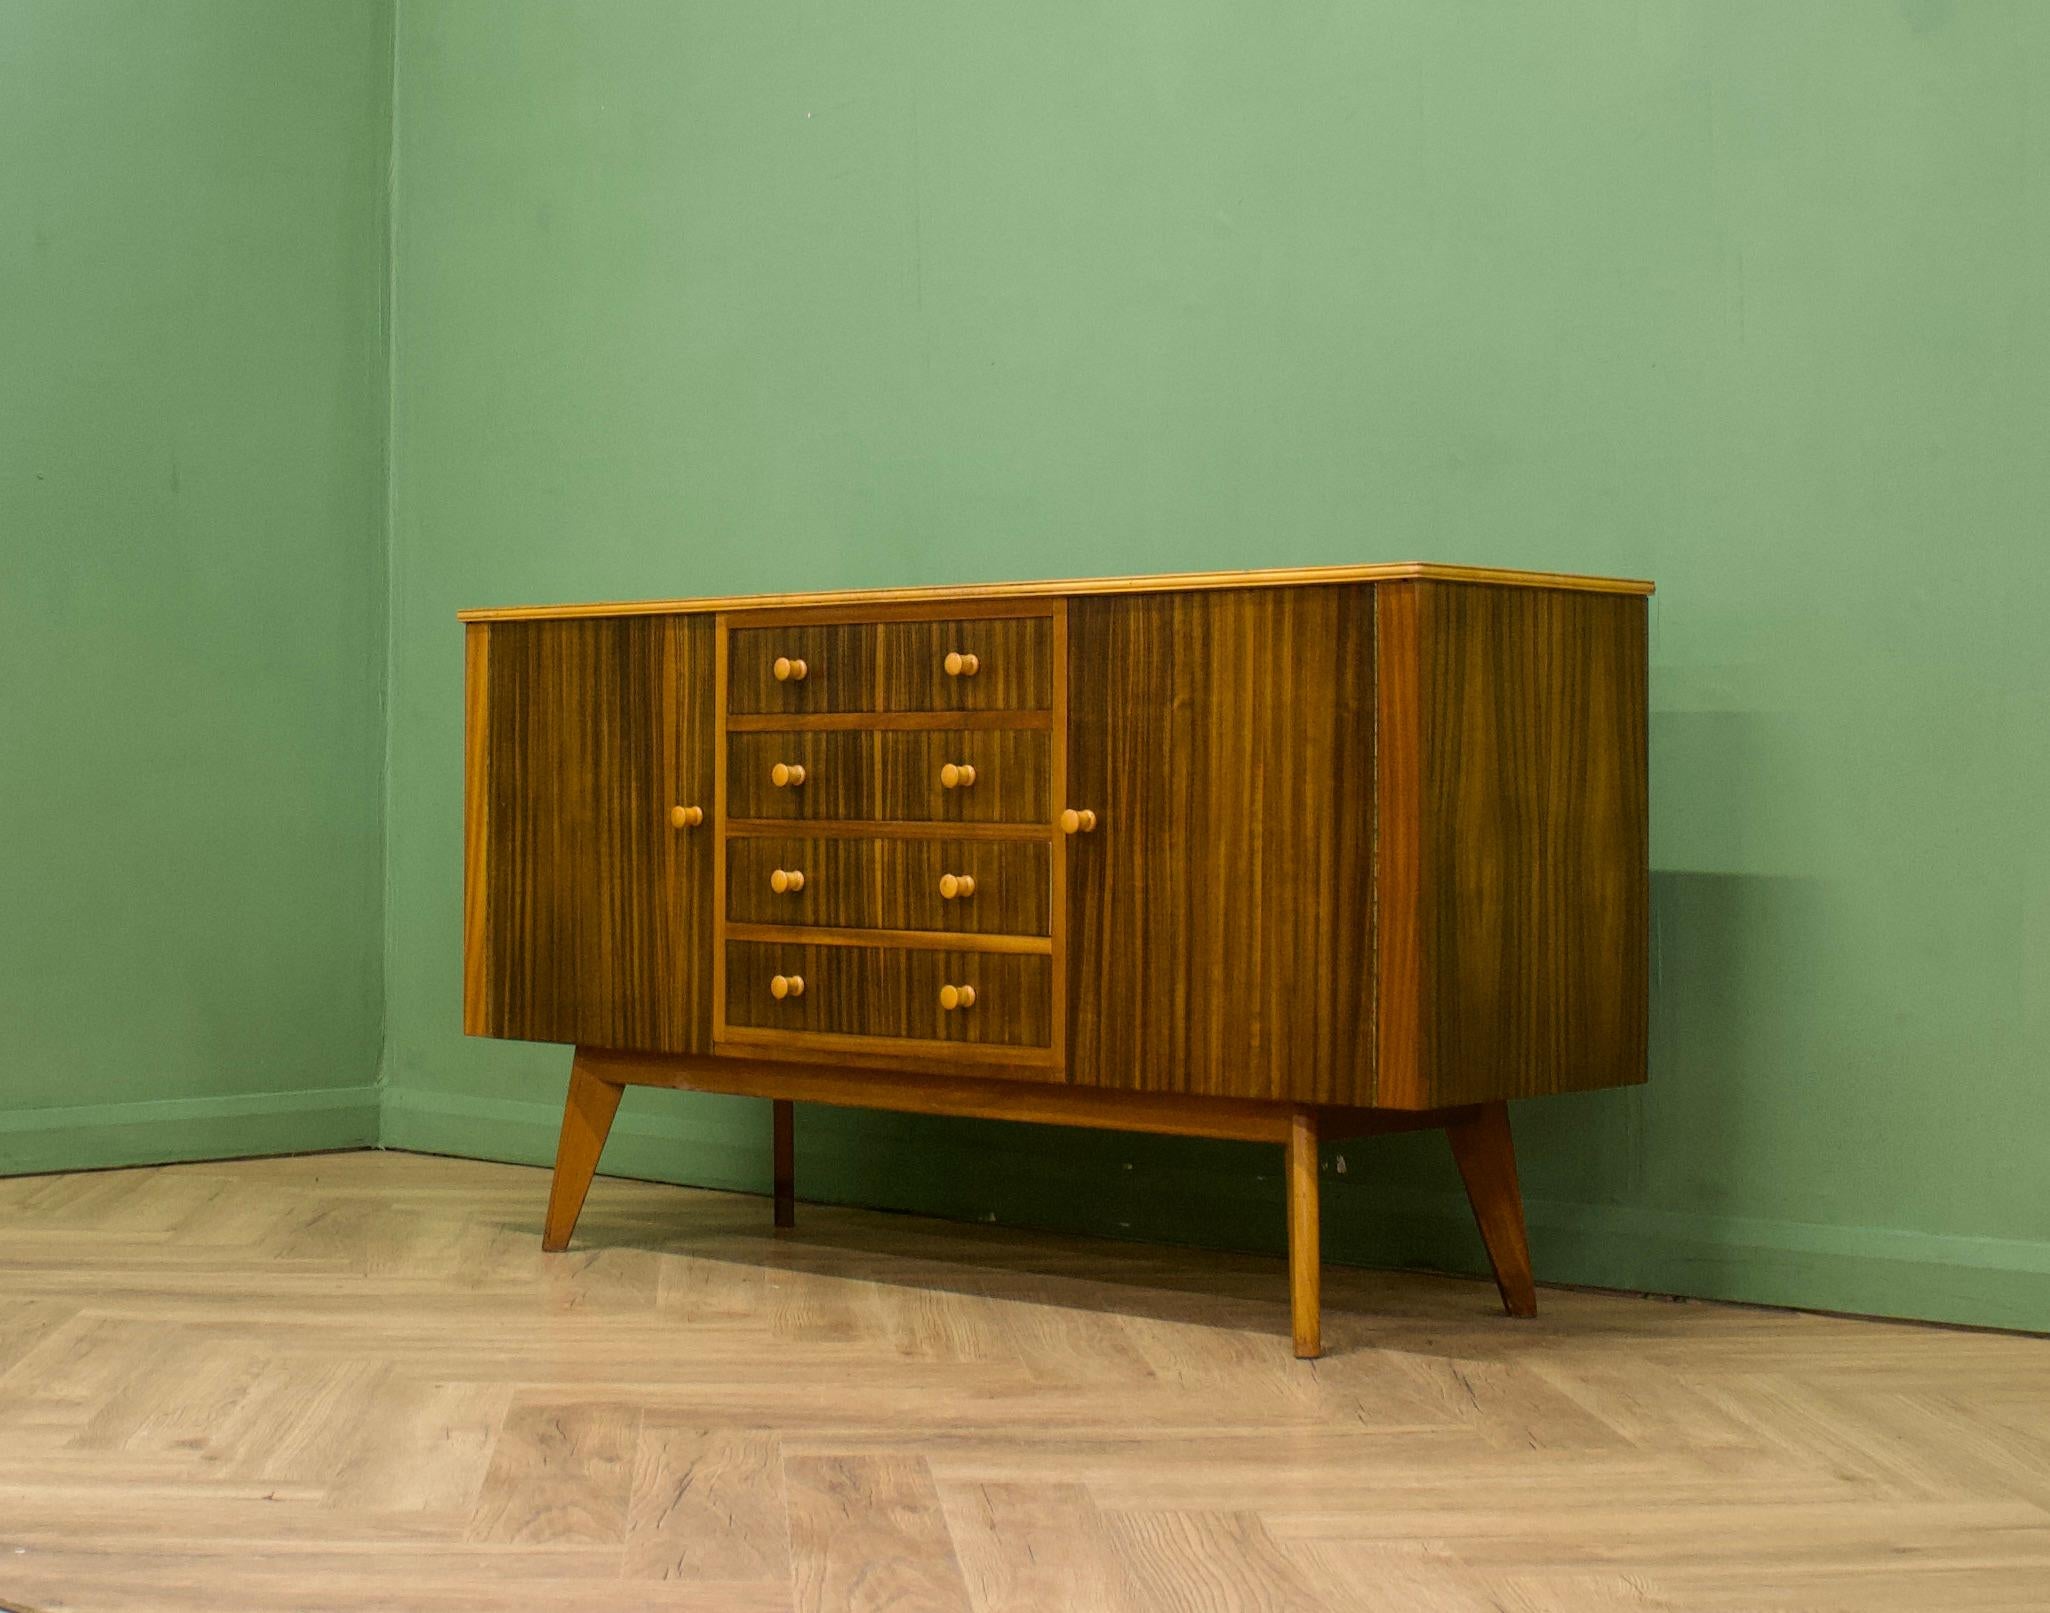 British Midcentury Walnut Sideboard from Morris of Glasgow, 1950s For Sale